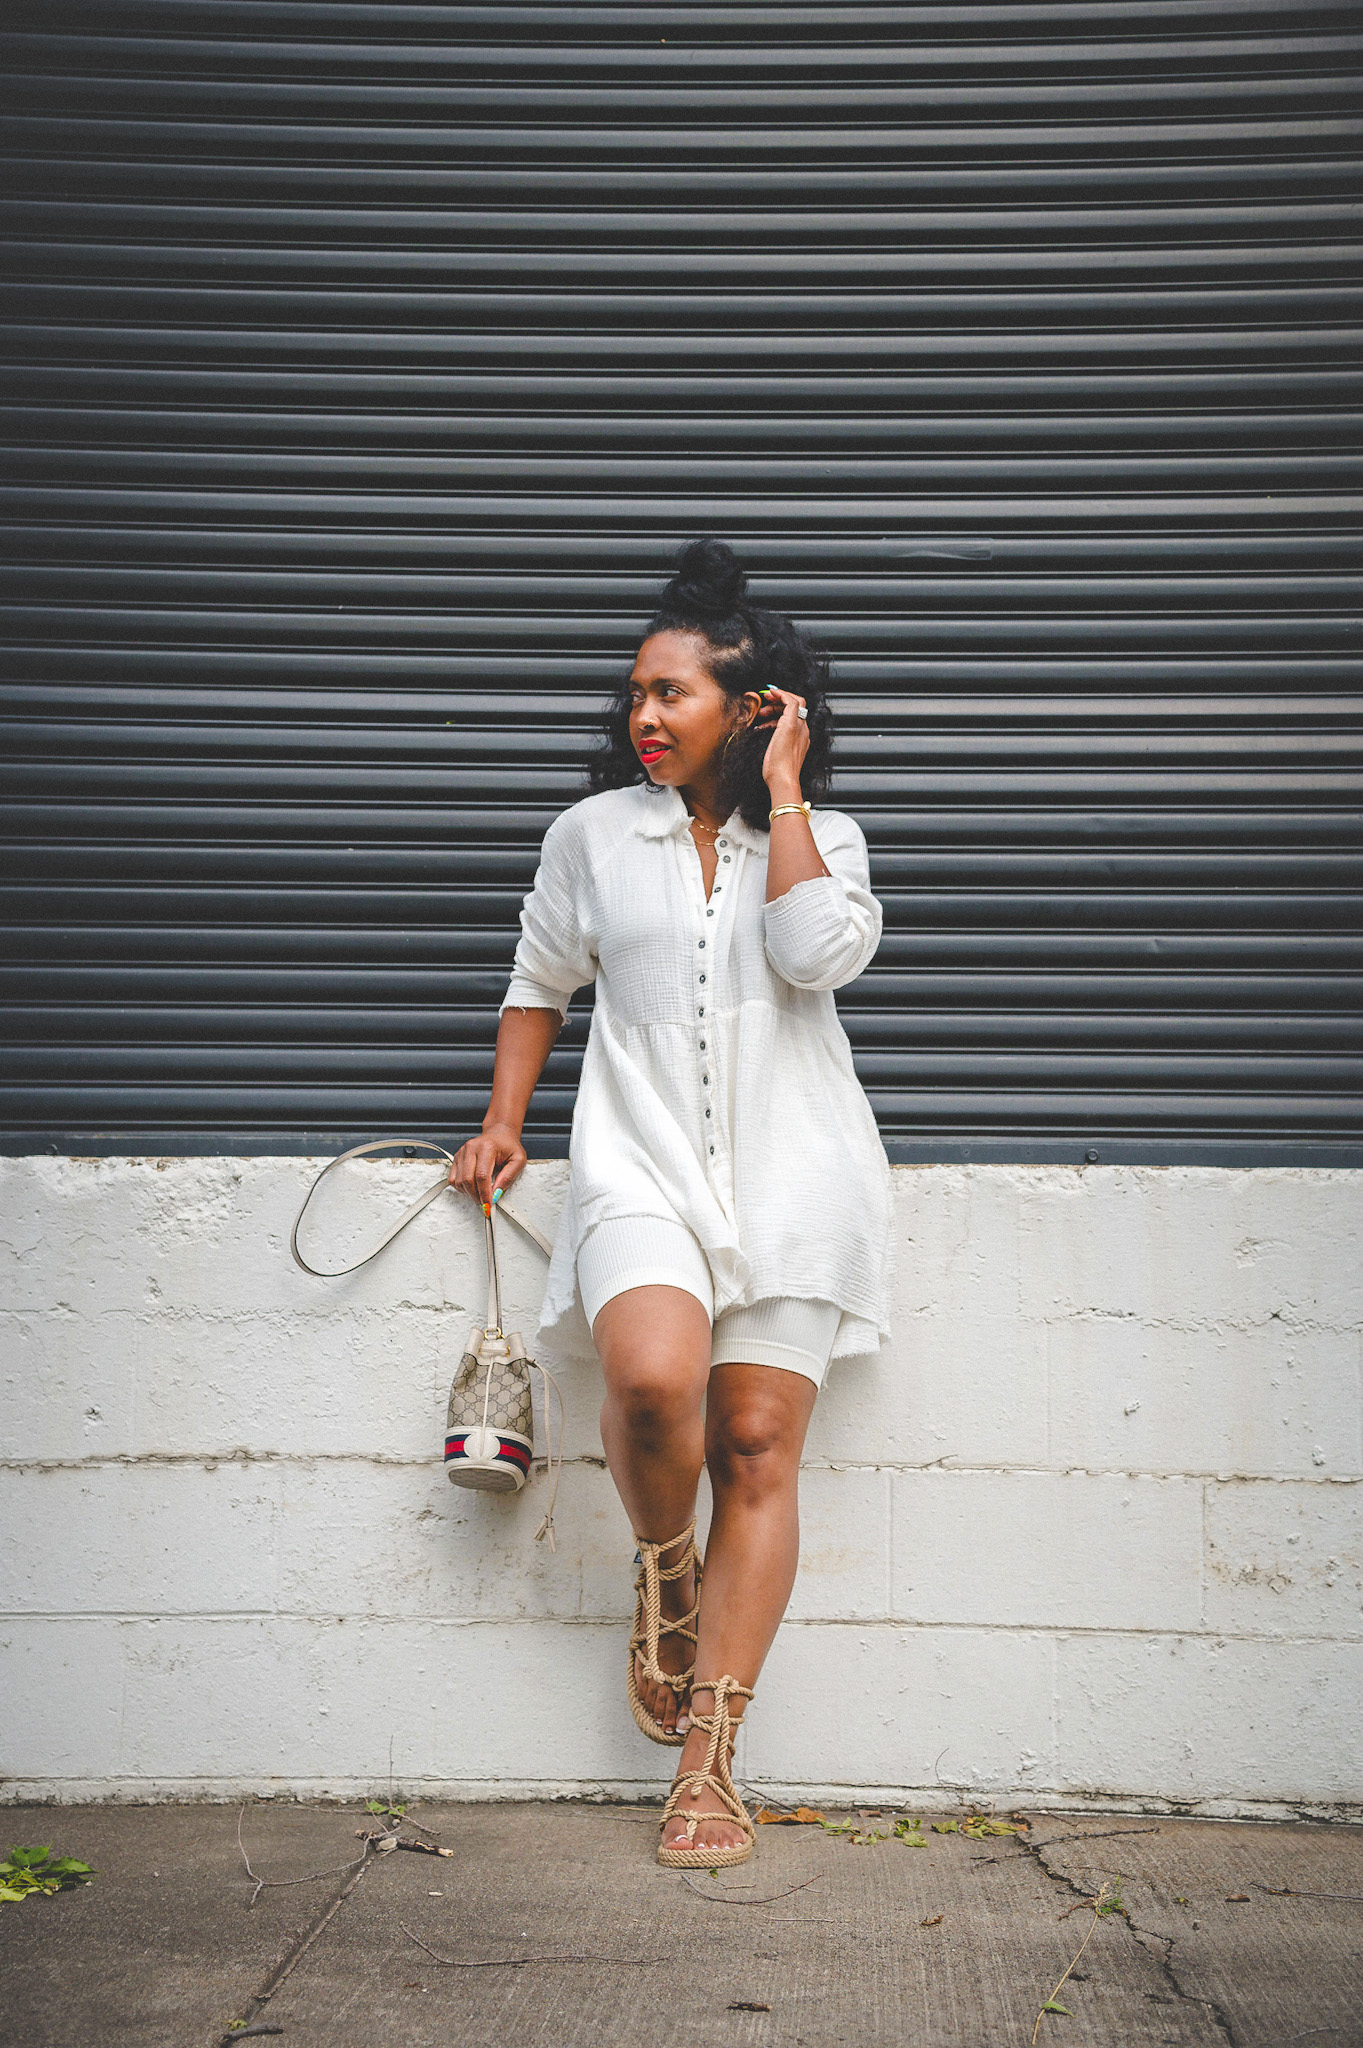 sweenee style,RELAXING WEEKEND OUTFIT IDEAS, indianapolis style influencer, content creator, indianapolis fashion blog, indiana blogger, black girls who blog, black influencer, summer outfit idea, summer outfits